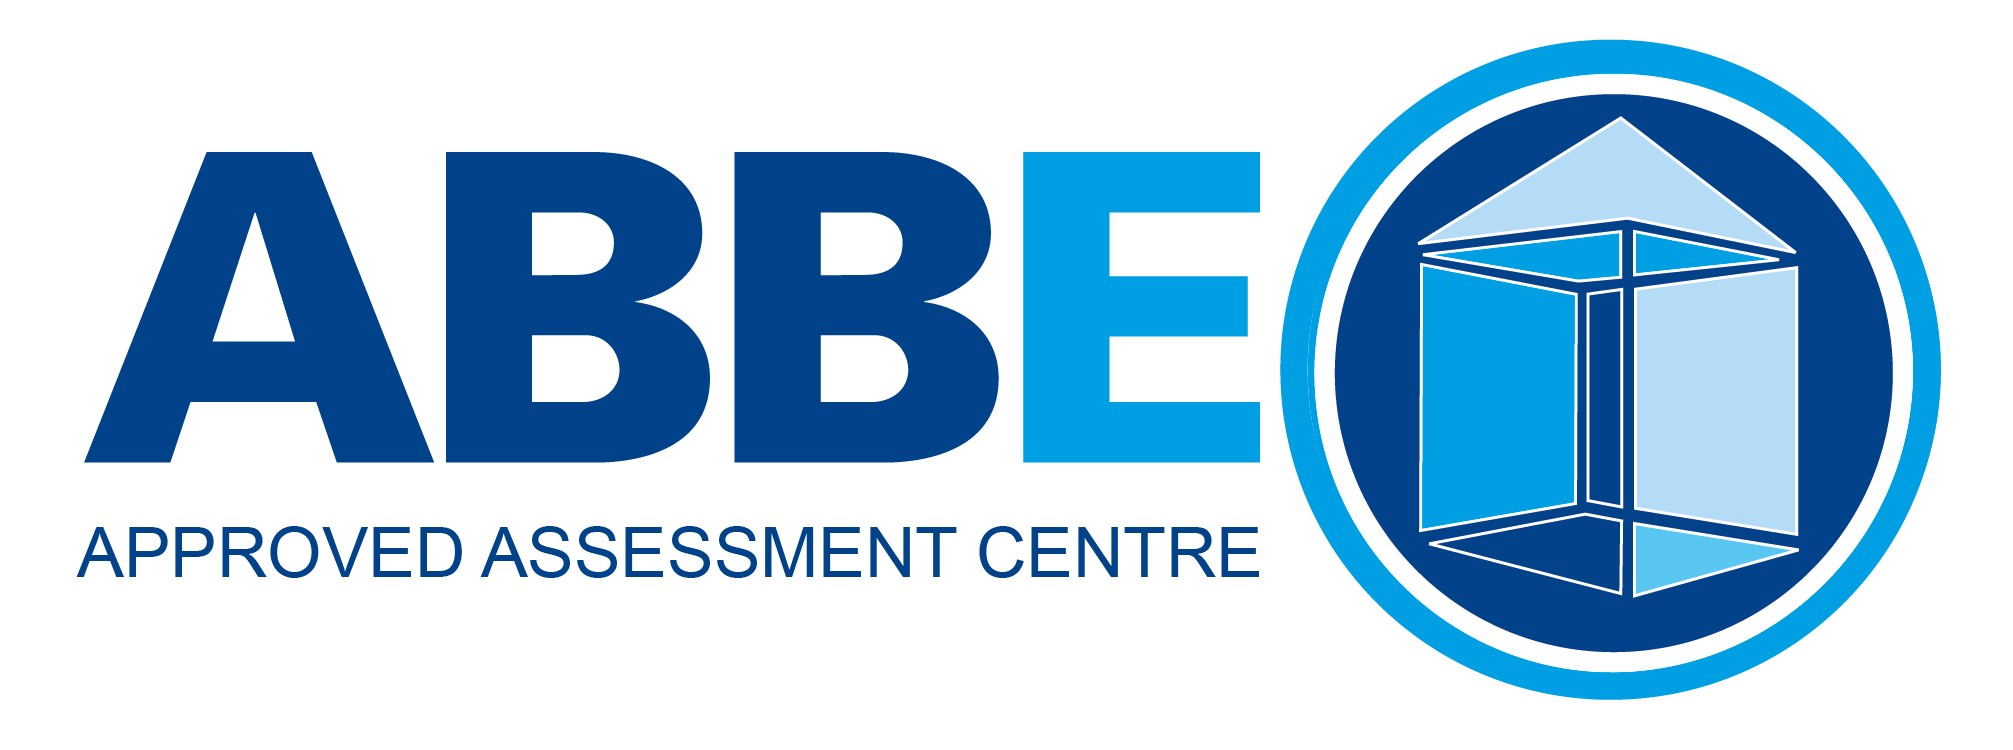 ABBE Approved Assessment Centre